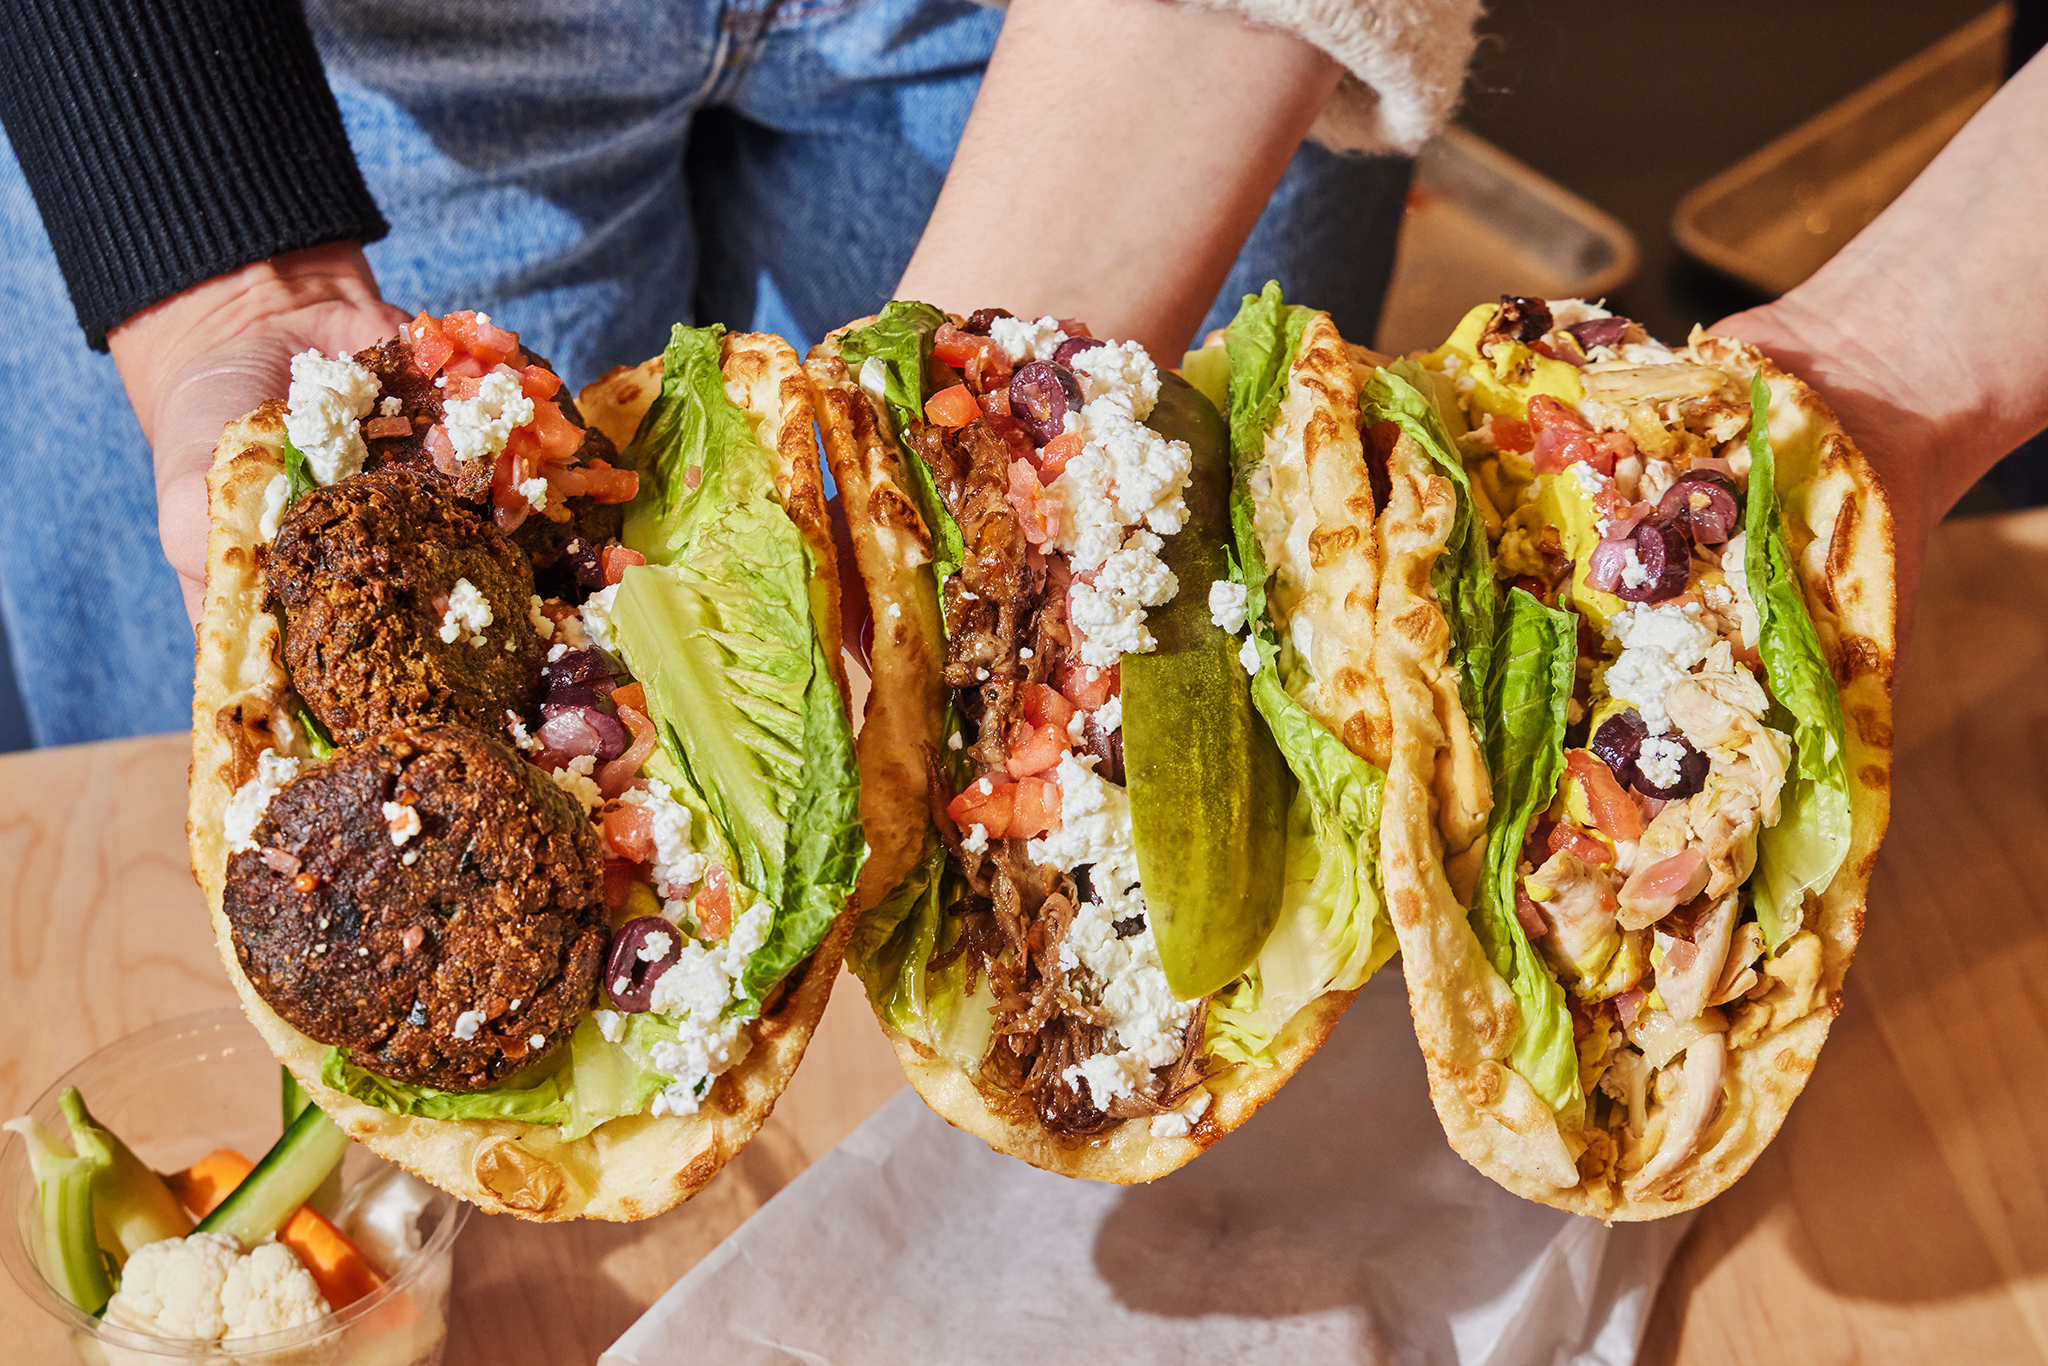 Three pita sandwiches held up and faced to the camera to reveal fillings including falafel, cheese, and lettuces.